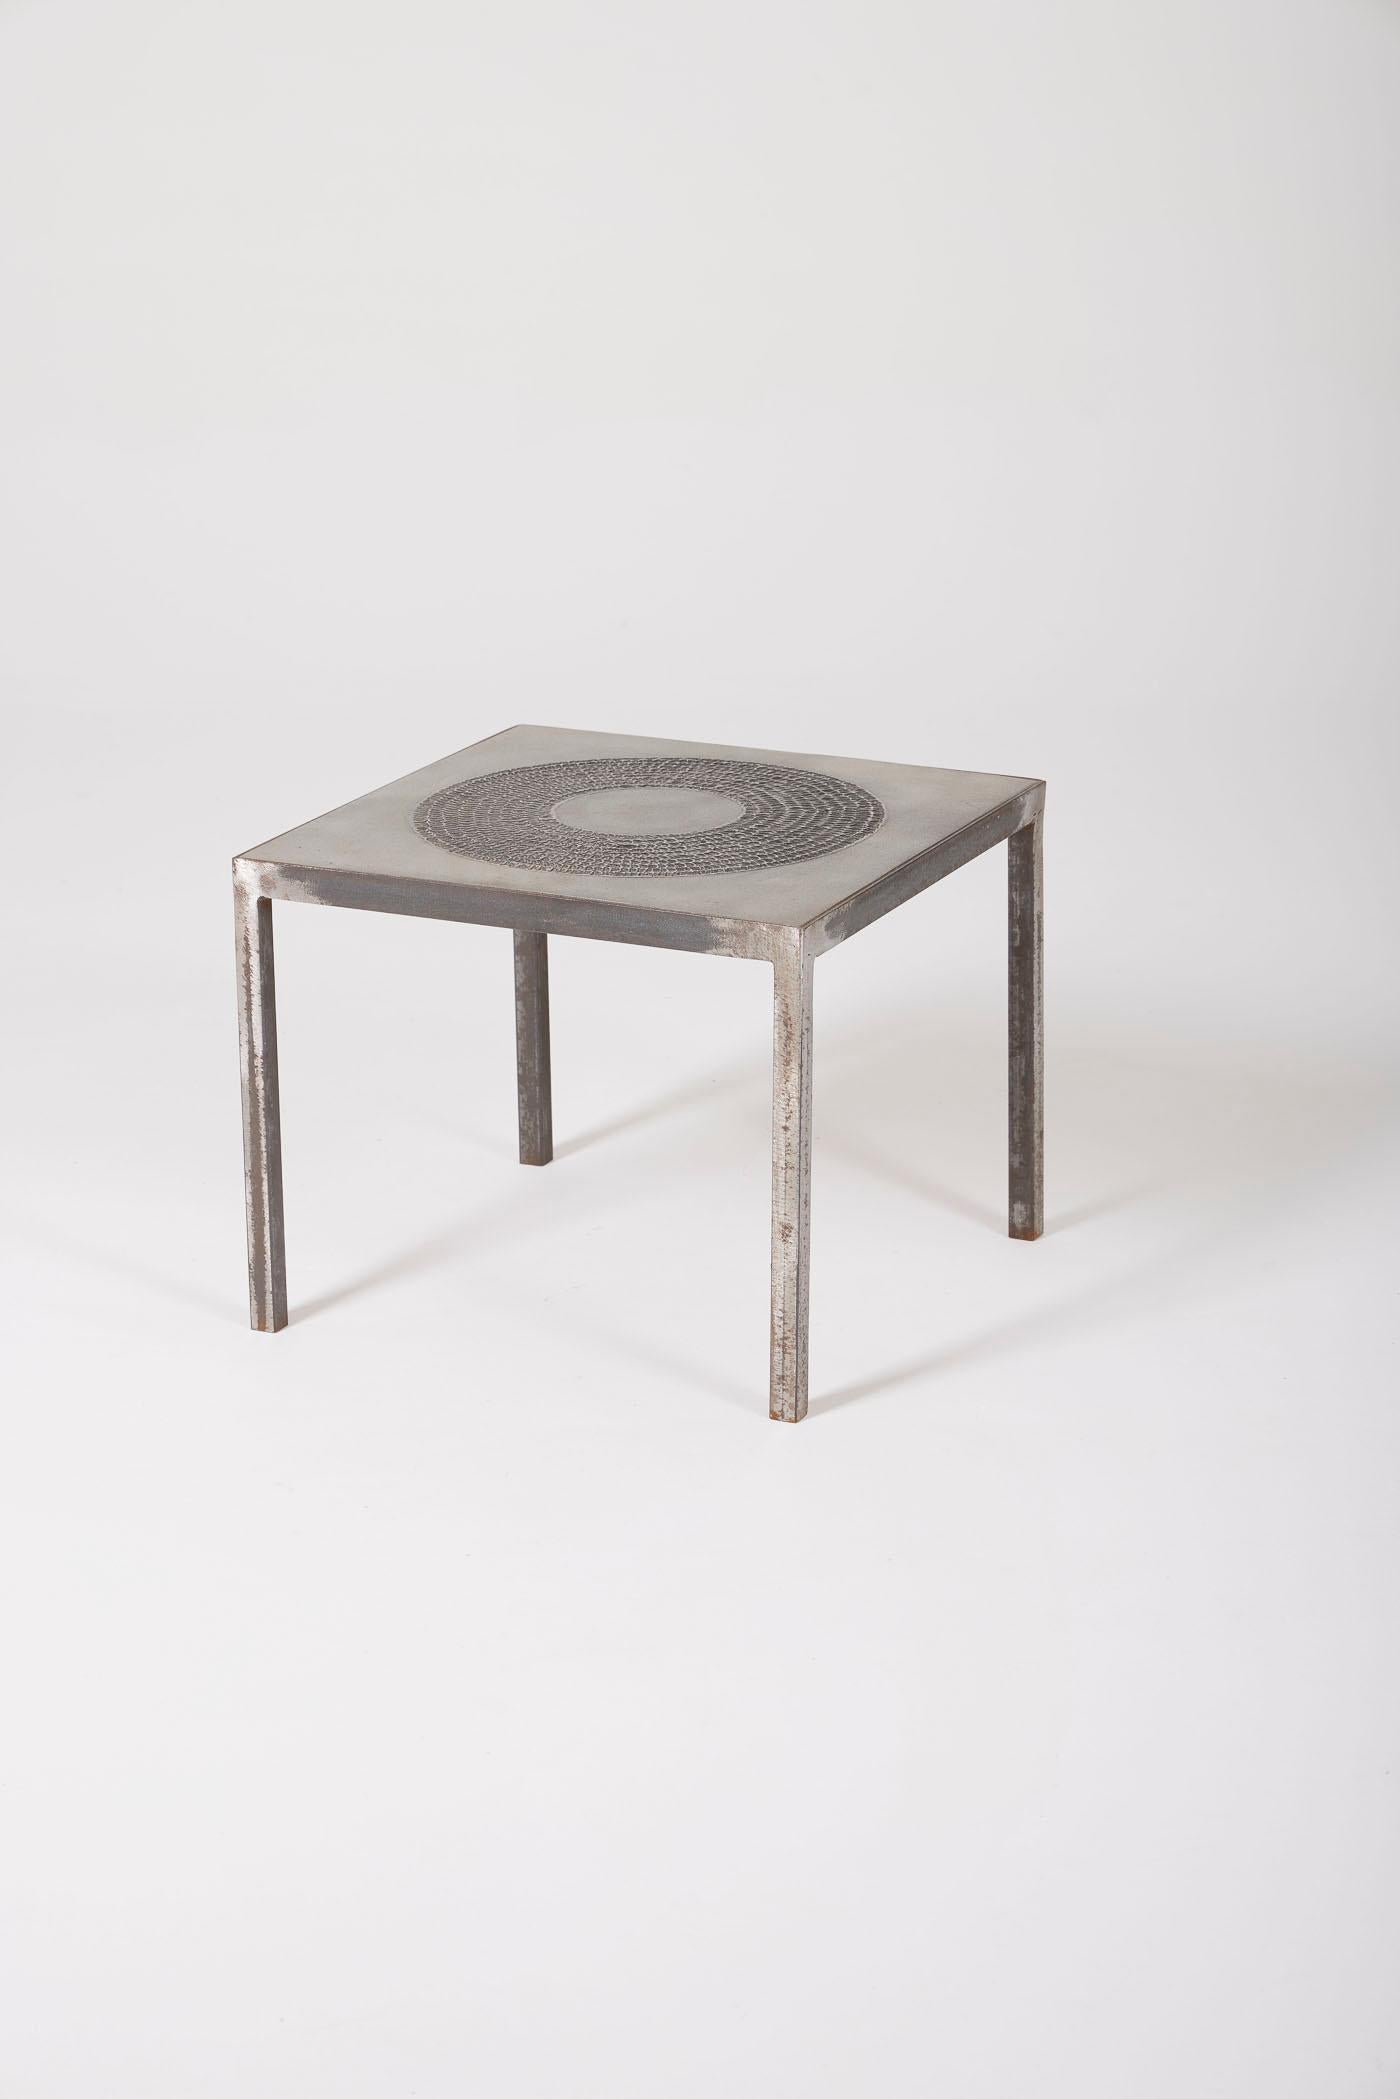 Pair of Brutalist side tables by designer Marc D'Haenens, 1970s. Metal structure and pewter tops. Very good condition
DV144